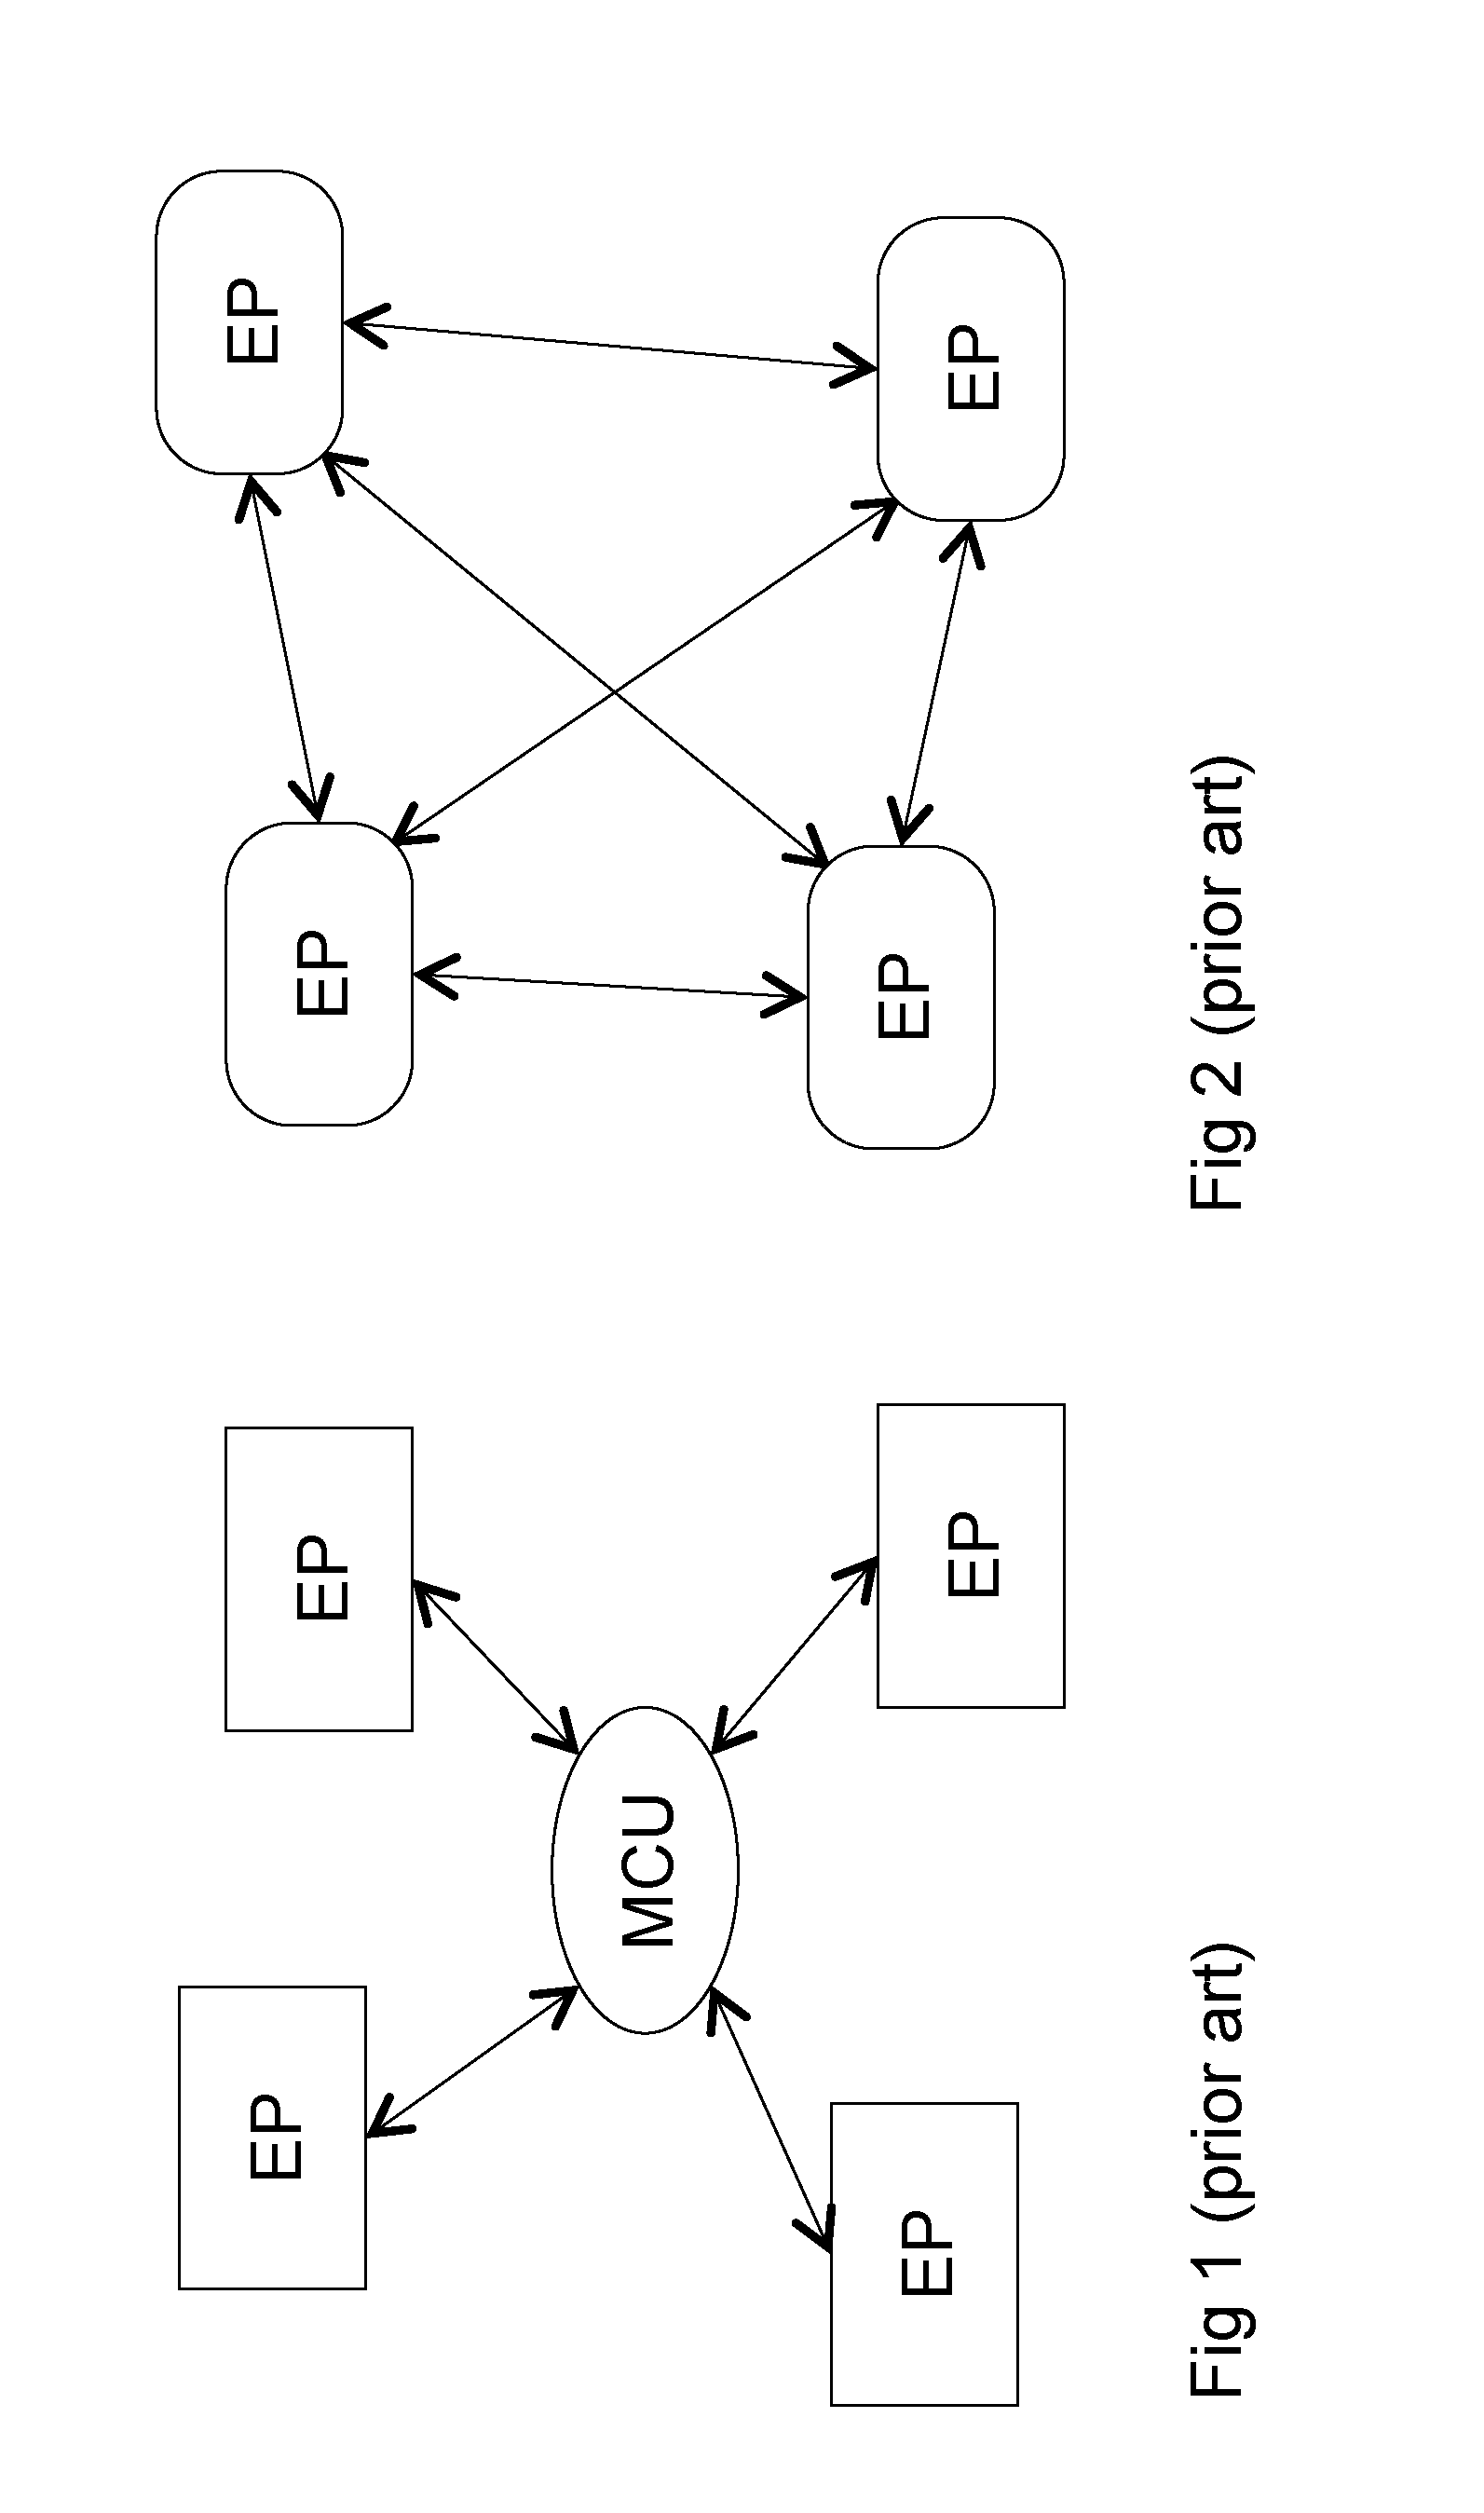 Method of Connecting Mesh-Topology Video Sessions to a Standard Video Conference Mixer